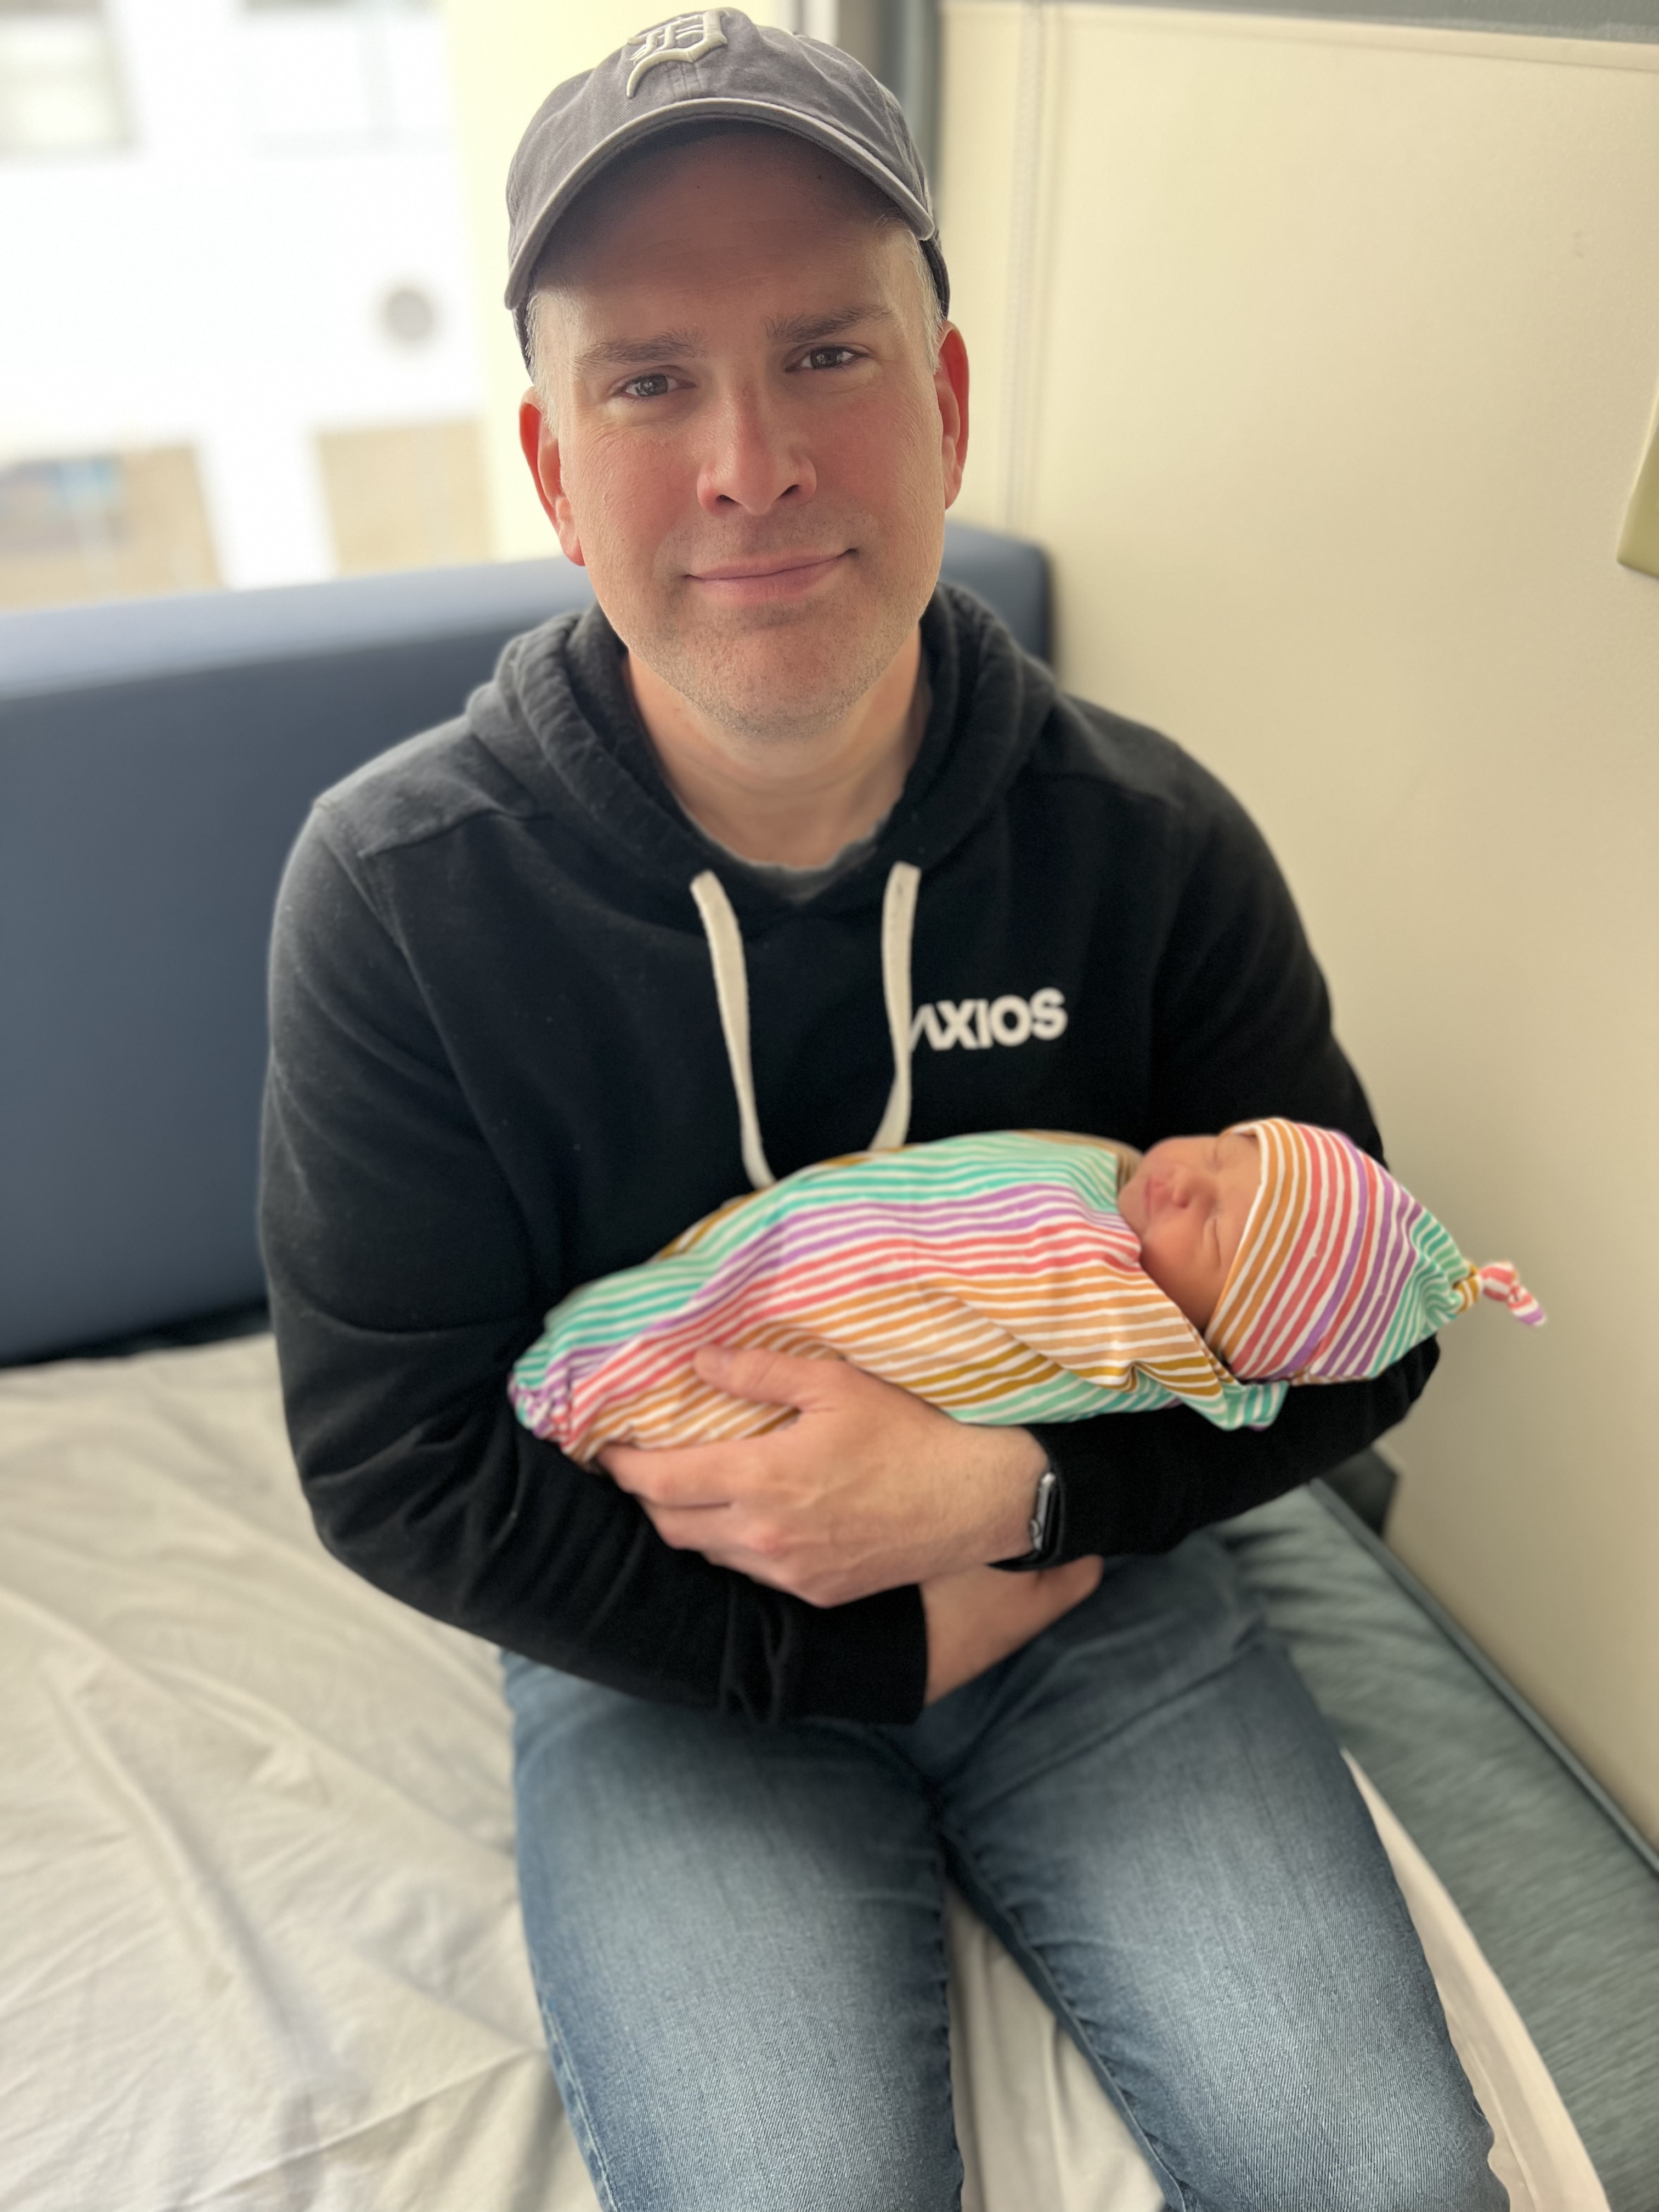 James Briggs holds his daughter, Meredith, in a rainbow-colored swaddle in the hospital after her birth.